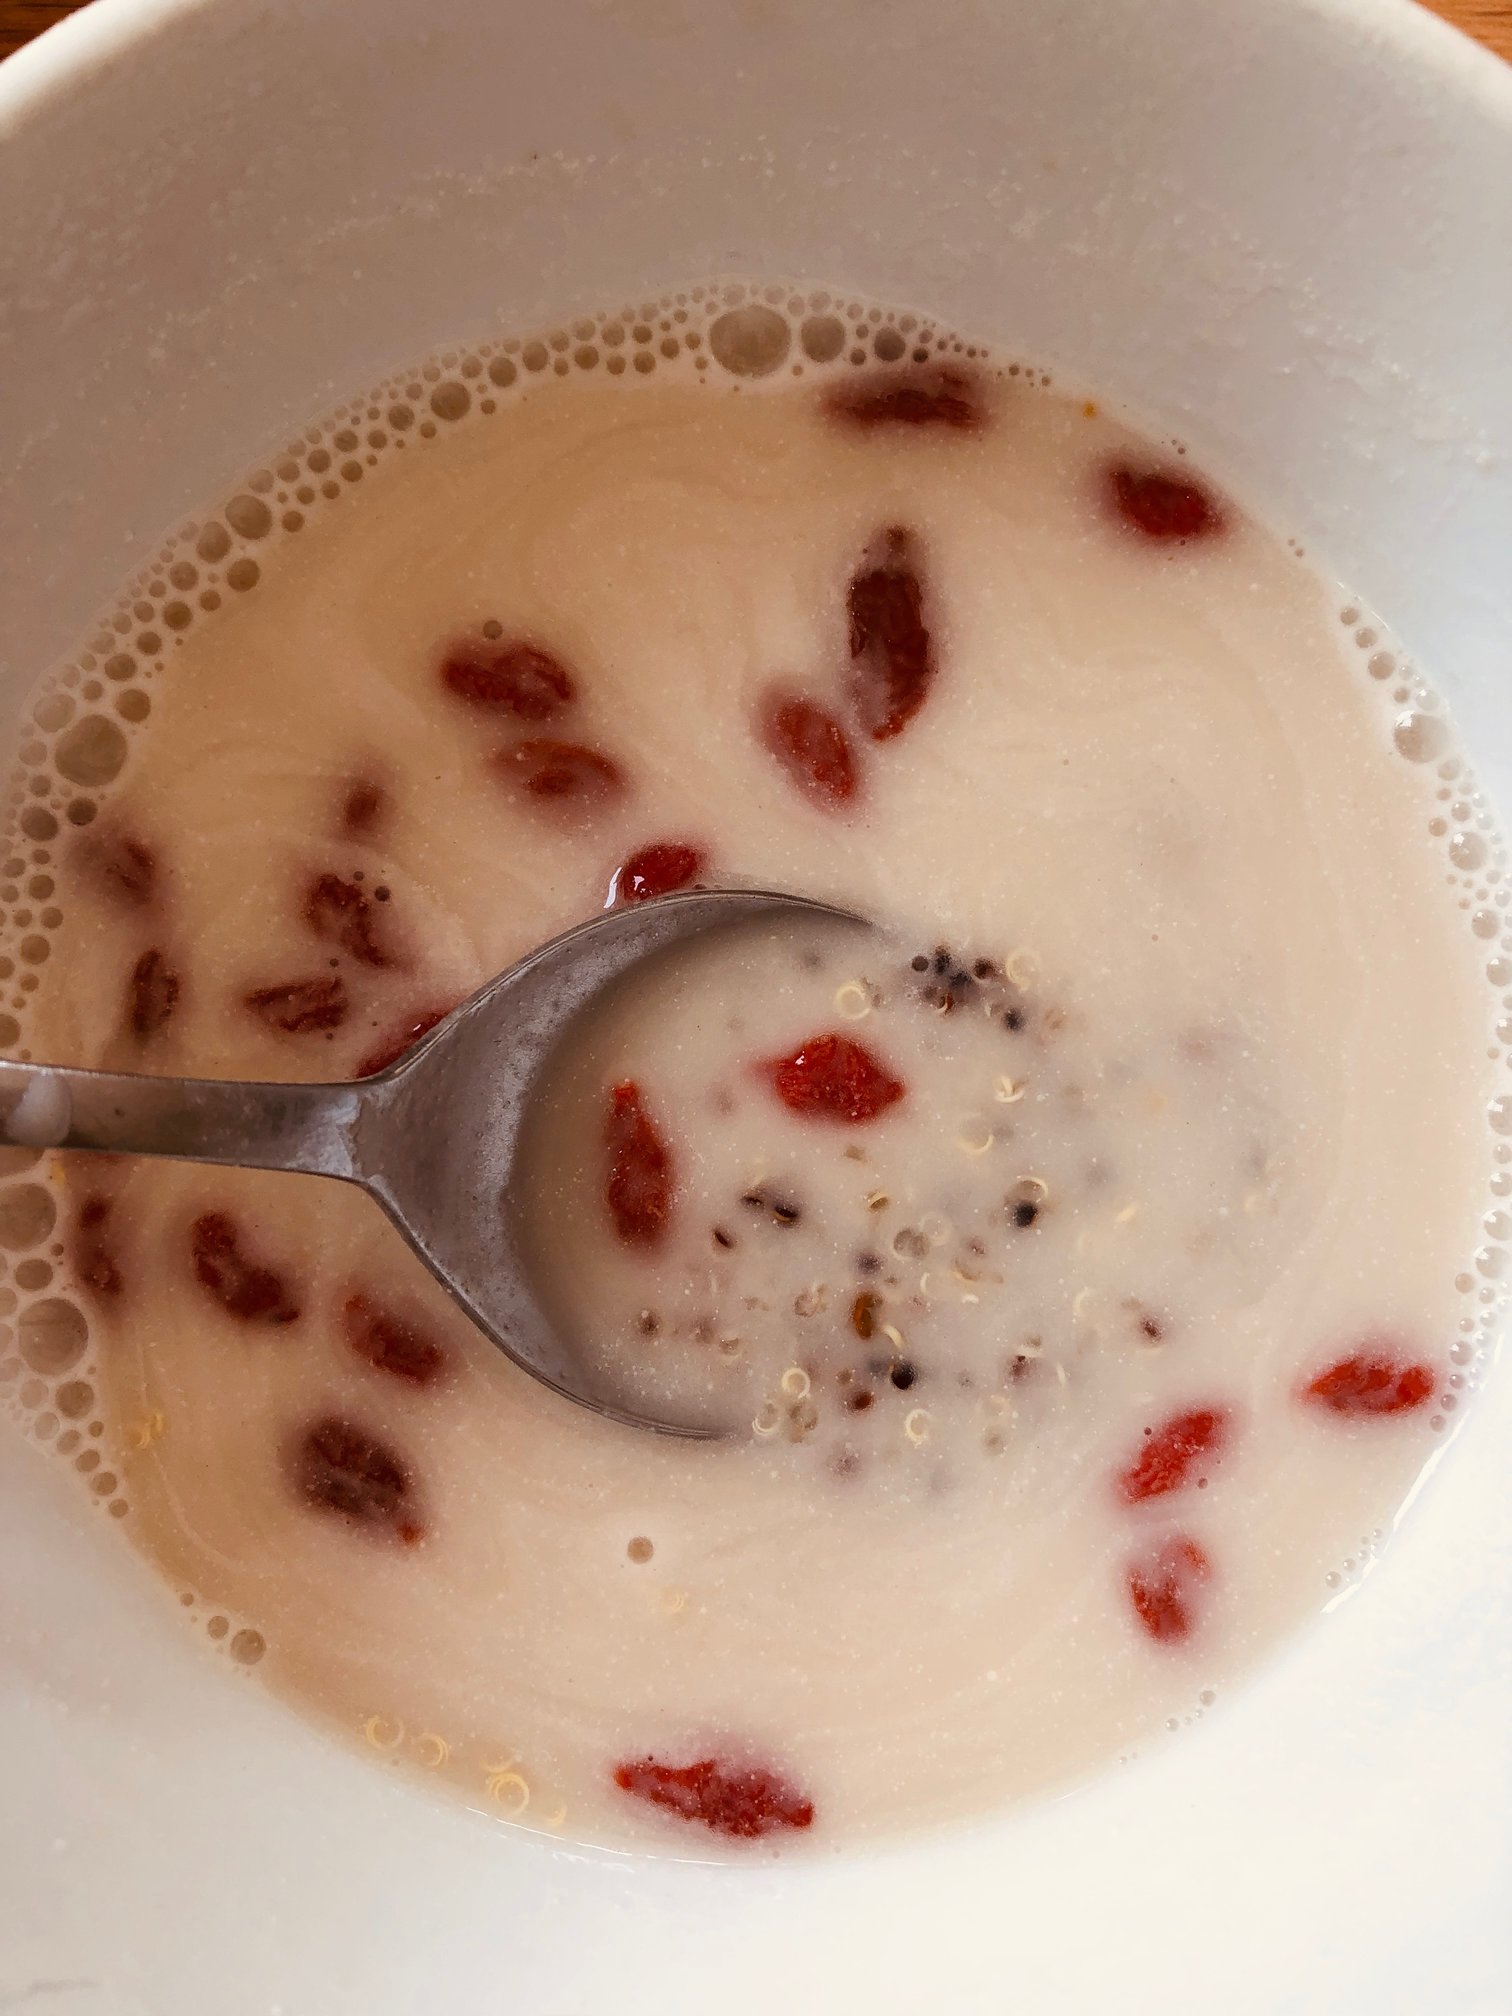 Image of filling quinoa pudding as portion size per person